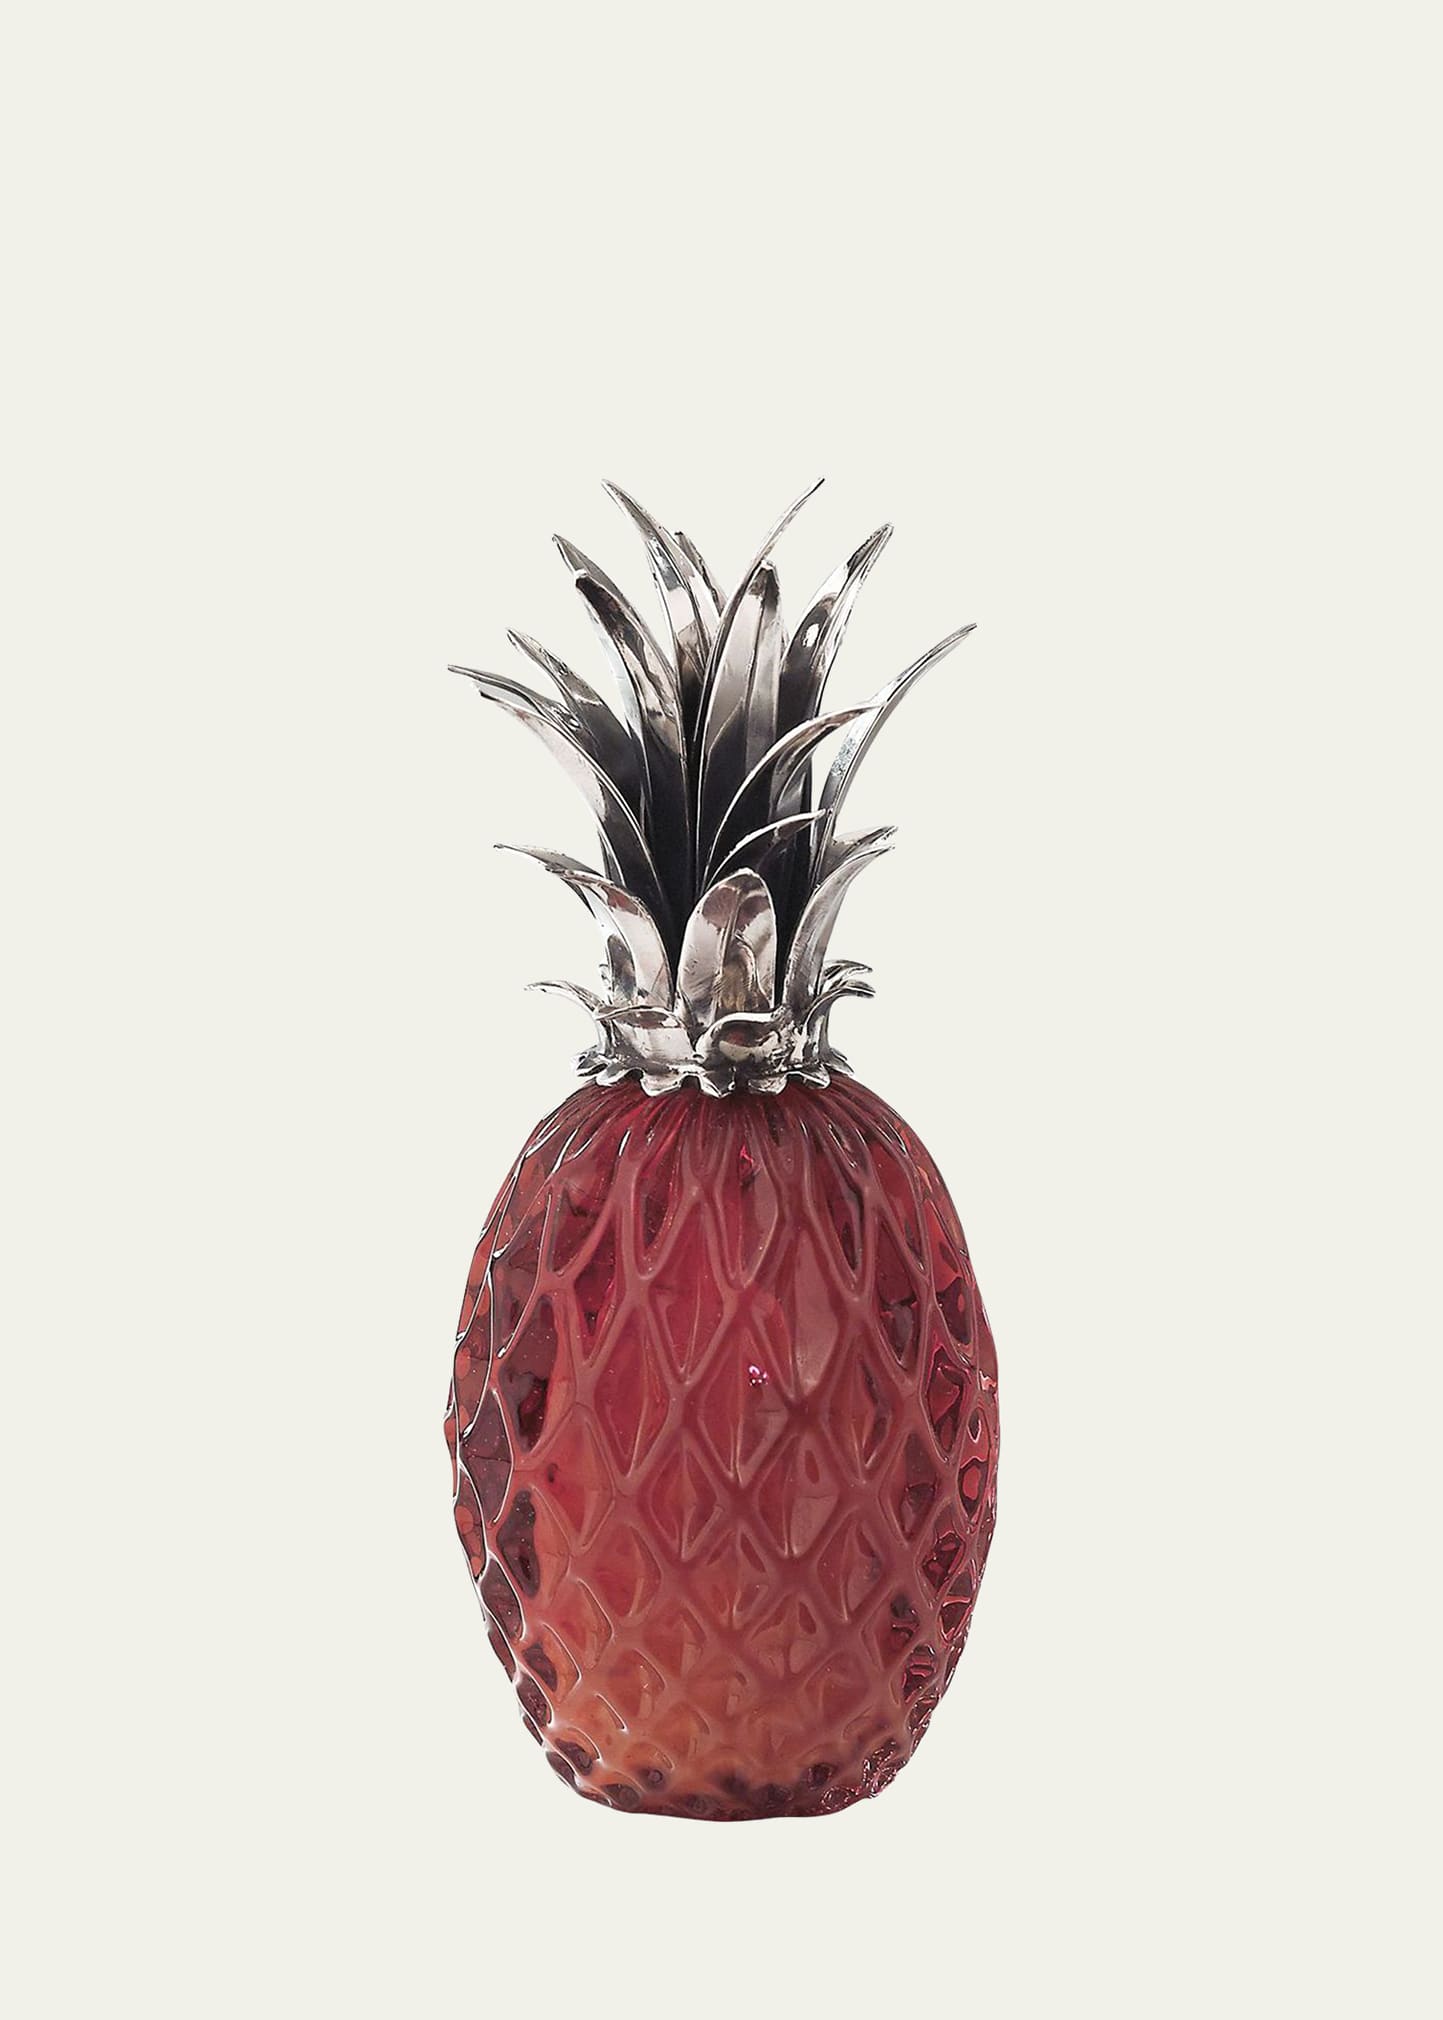 Buccellati Pineapple Place Card Holder, Each